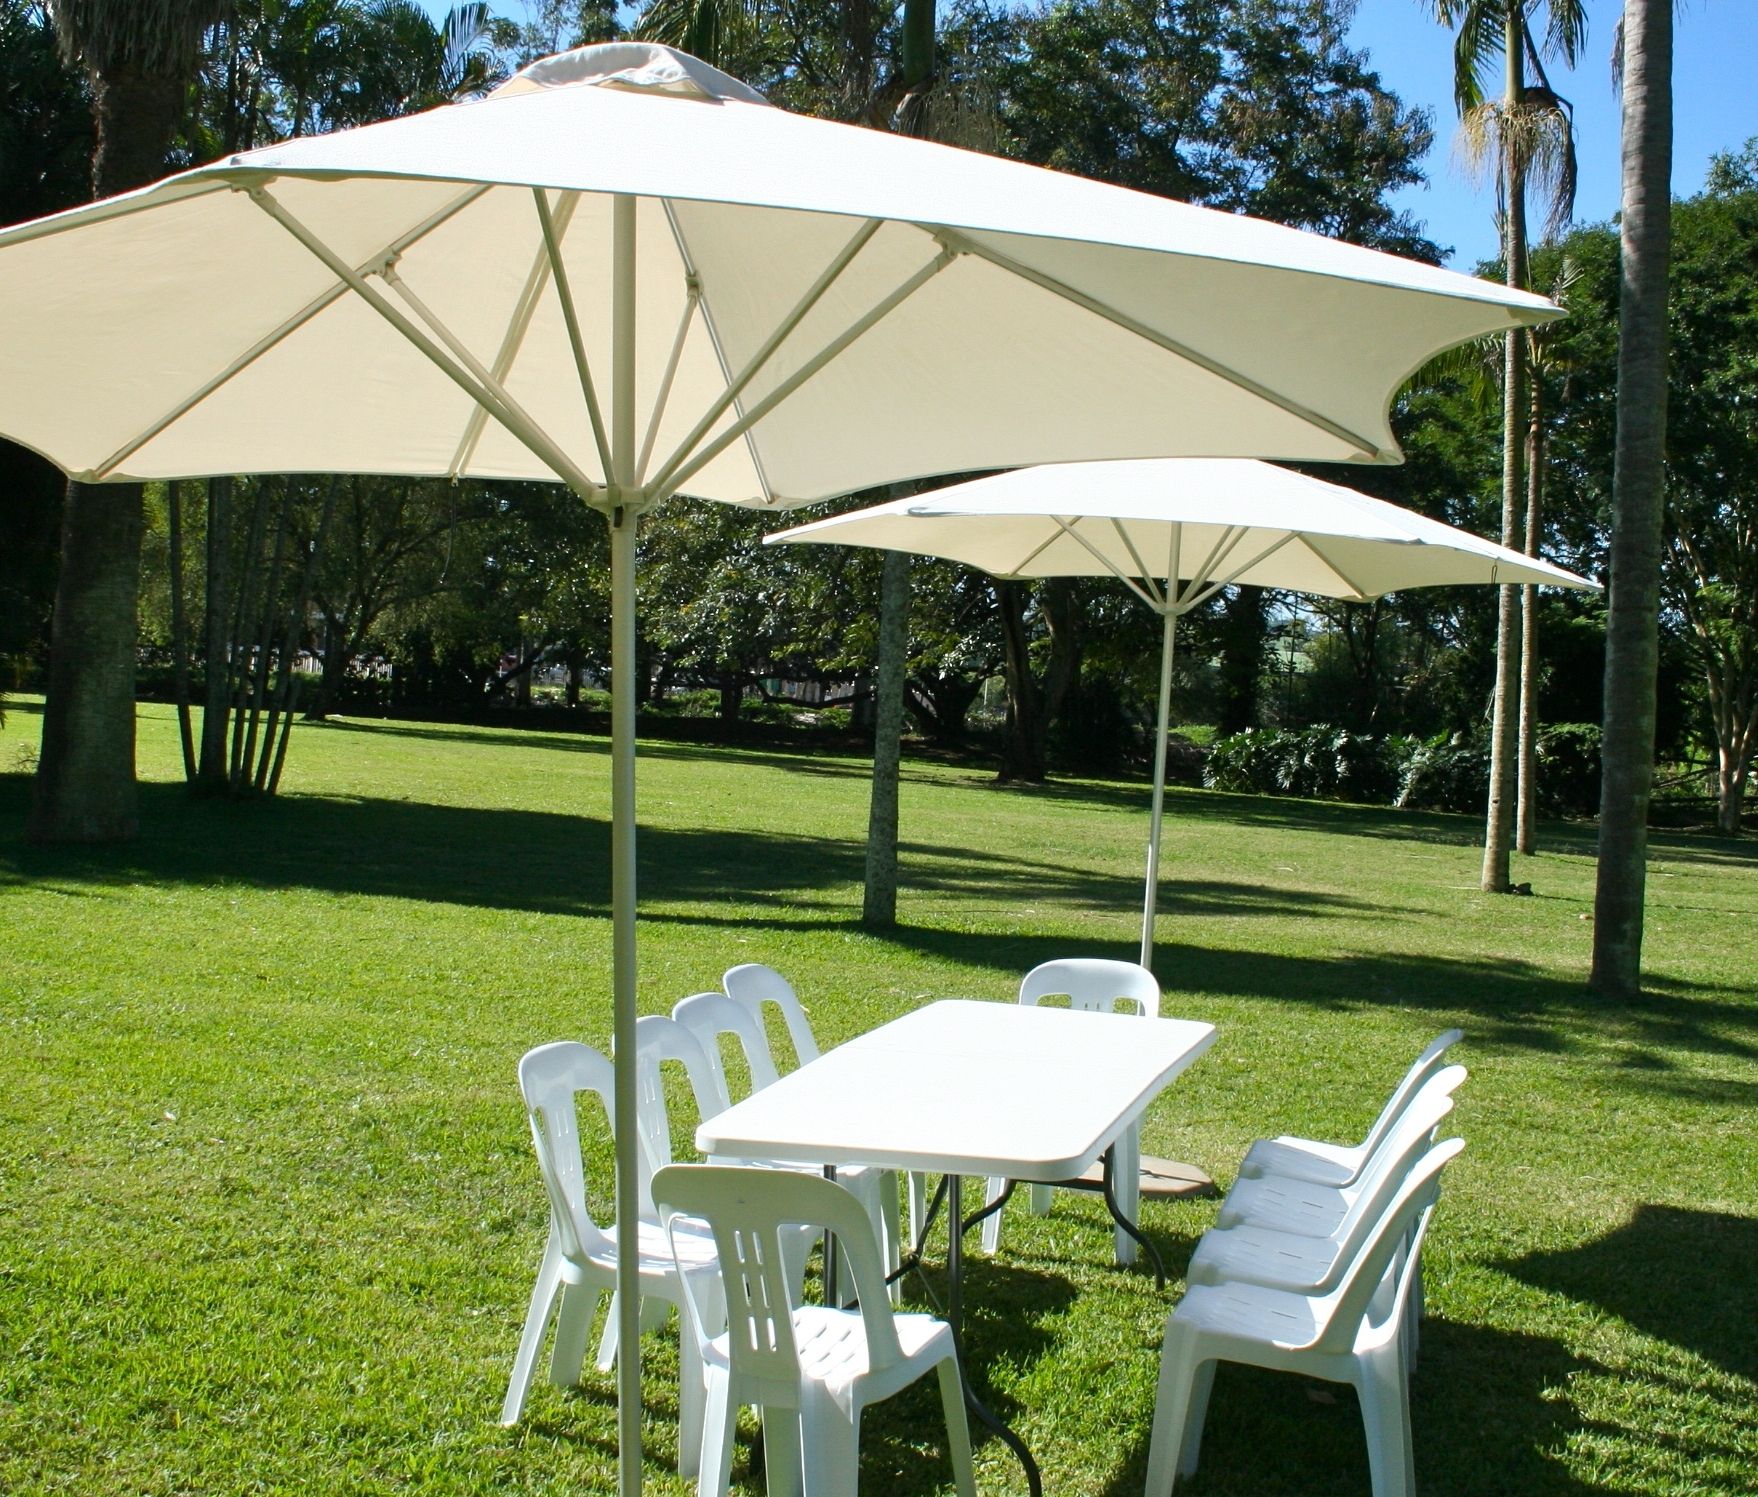 White Patio Umbrellas Intended For Well Known Outdoor Patio Umbrella Rental Umbrella Hire (View 18 of 20)